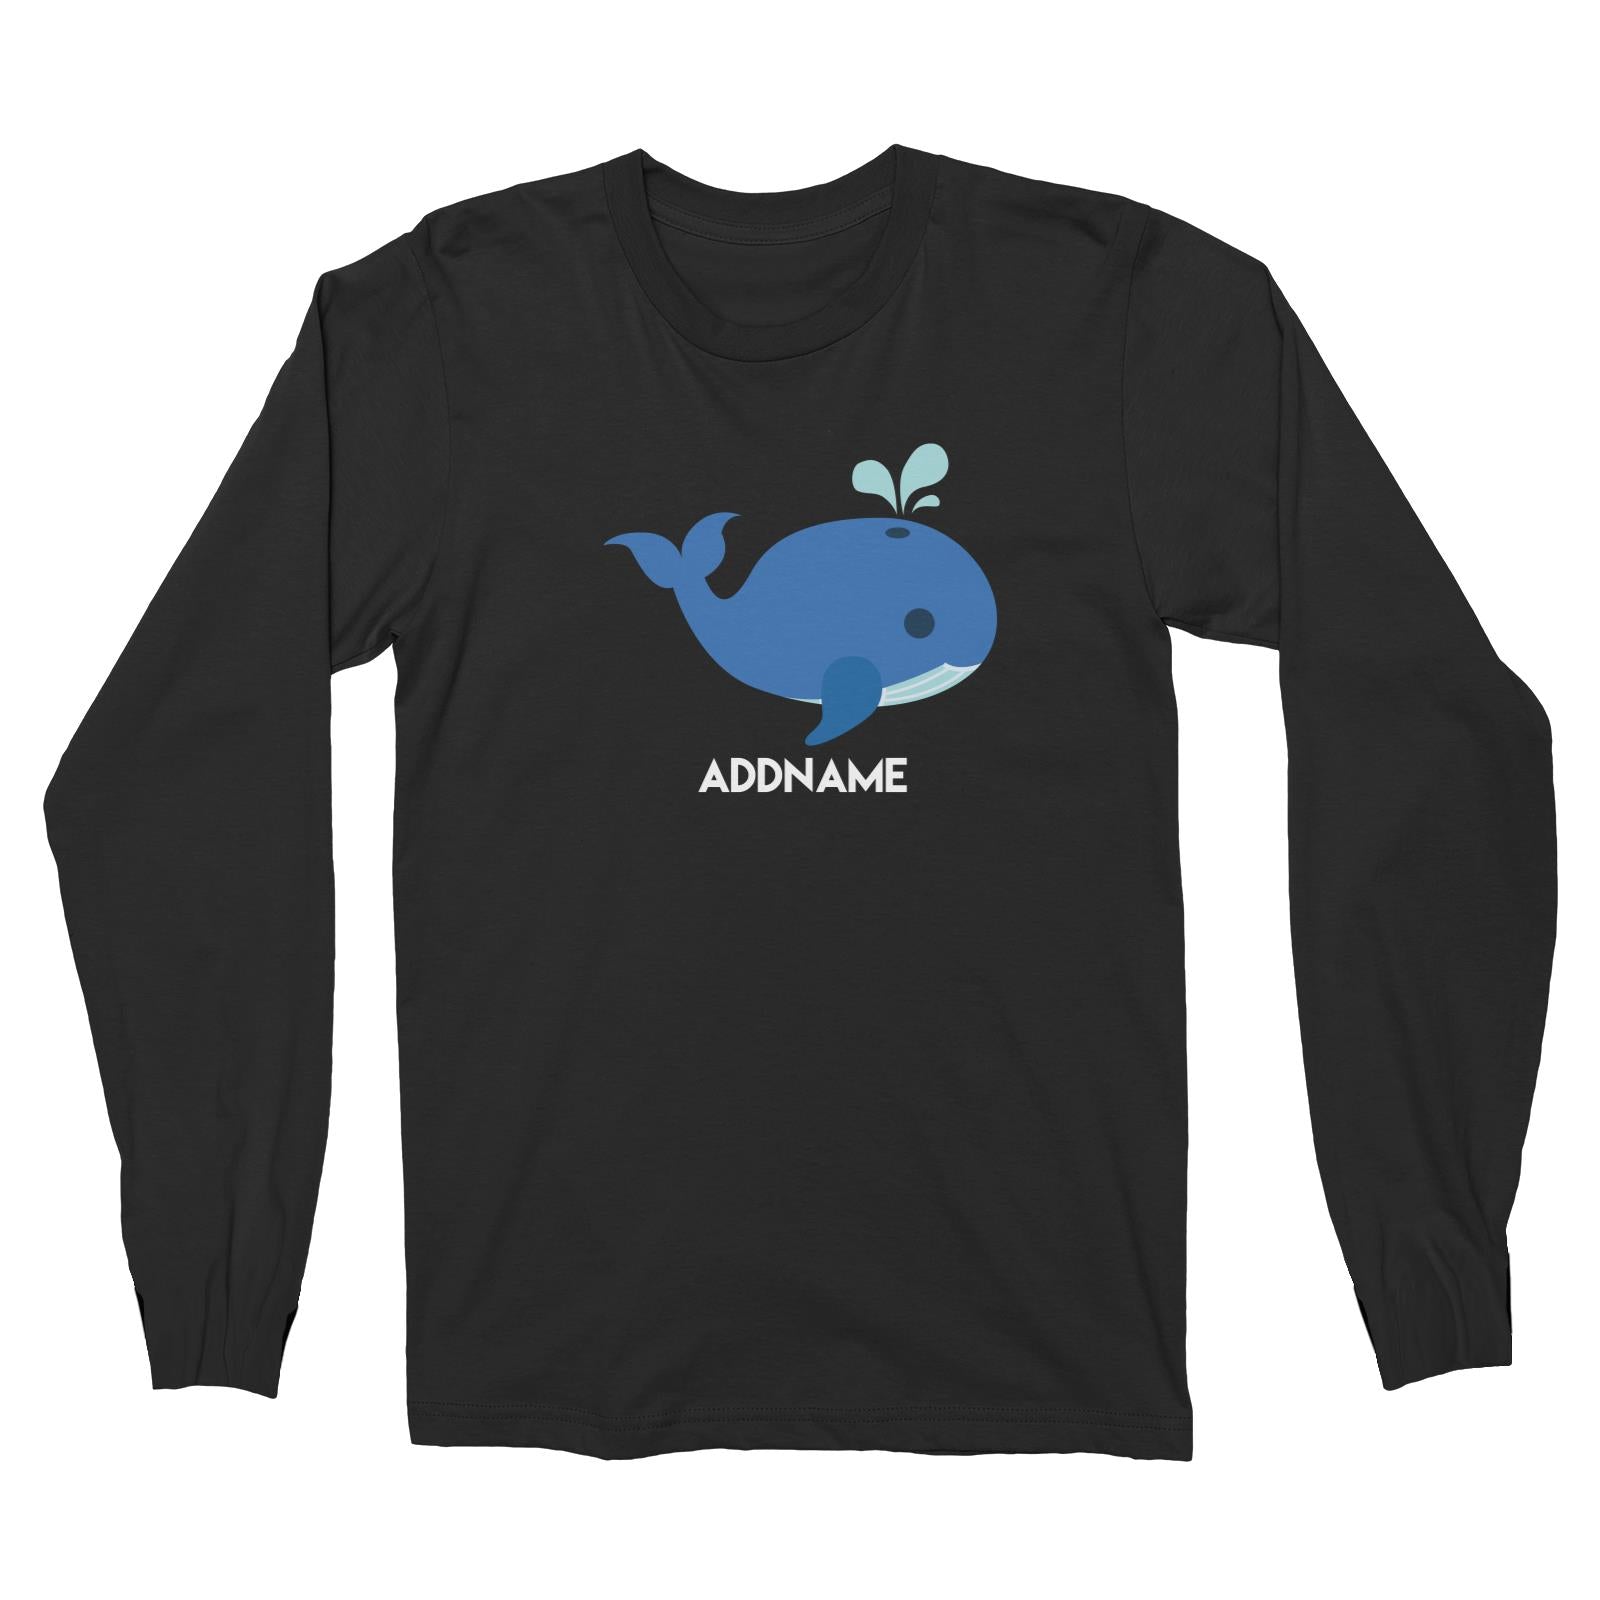 Sailor Whale Addname Long Sleeve Unisex T-Shirt  Matching Family Personalizable Designs